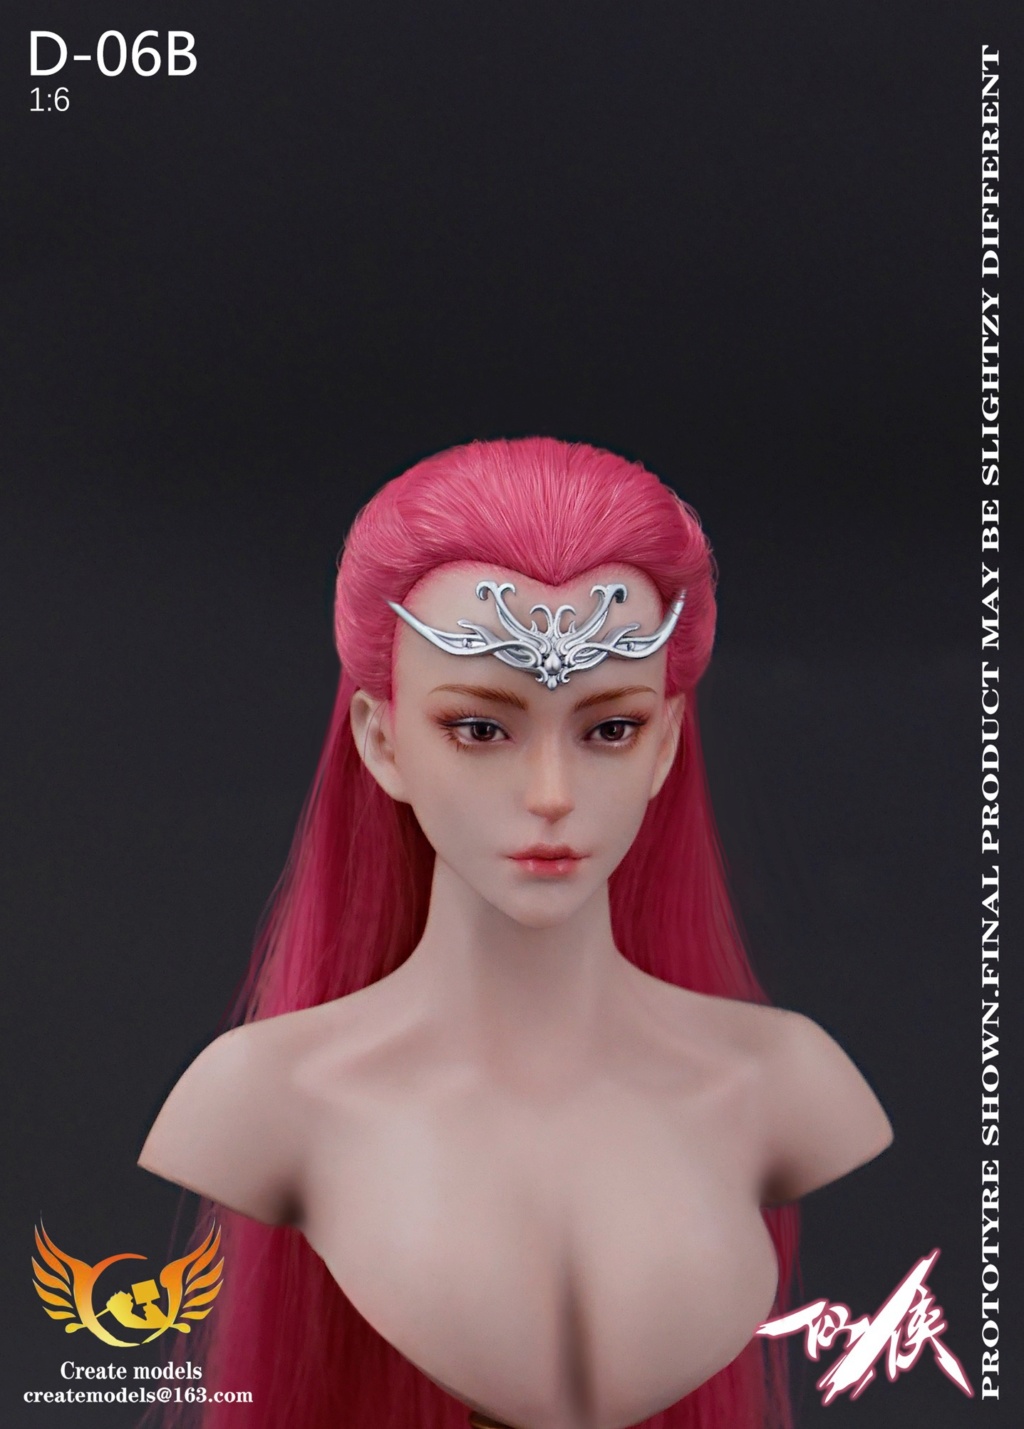 NEW PRODUCT: Createmodels: 1/6 Xianxia series female head - AB two hair colors (D-06) 15340110